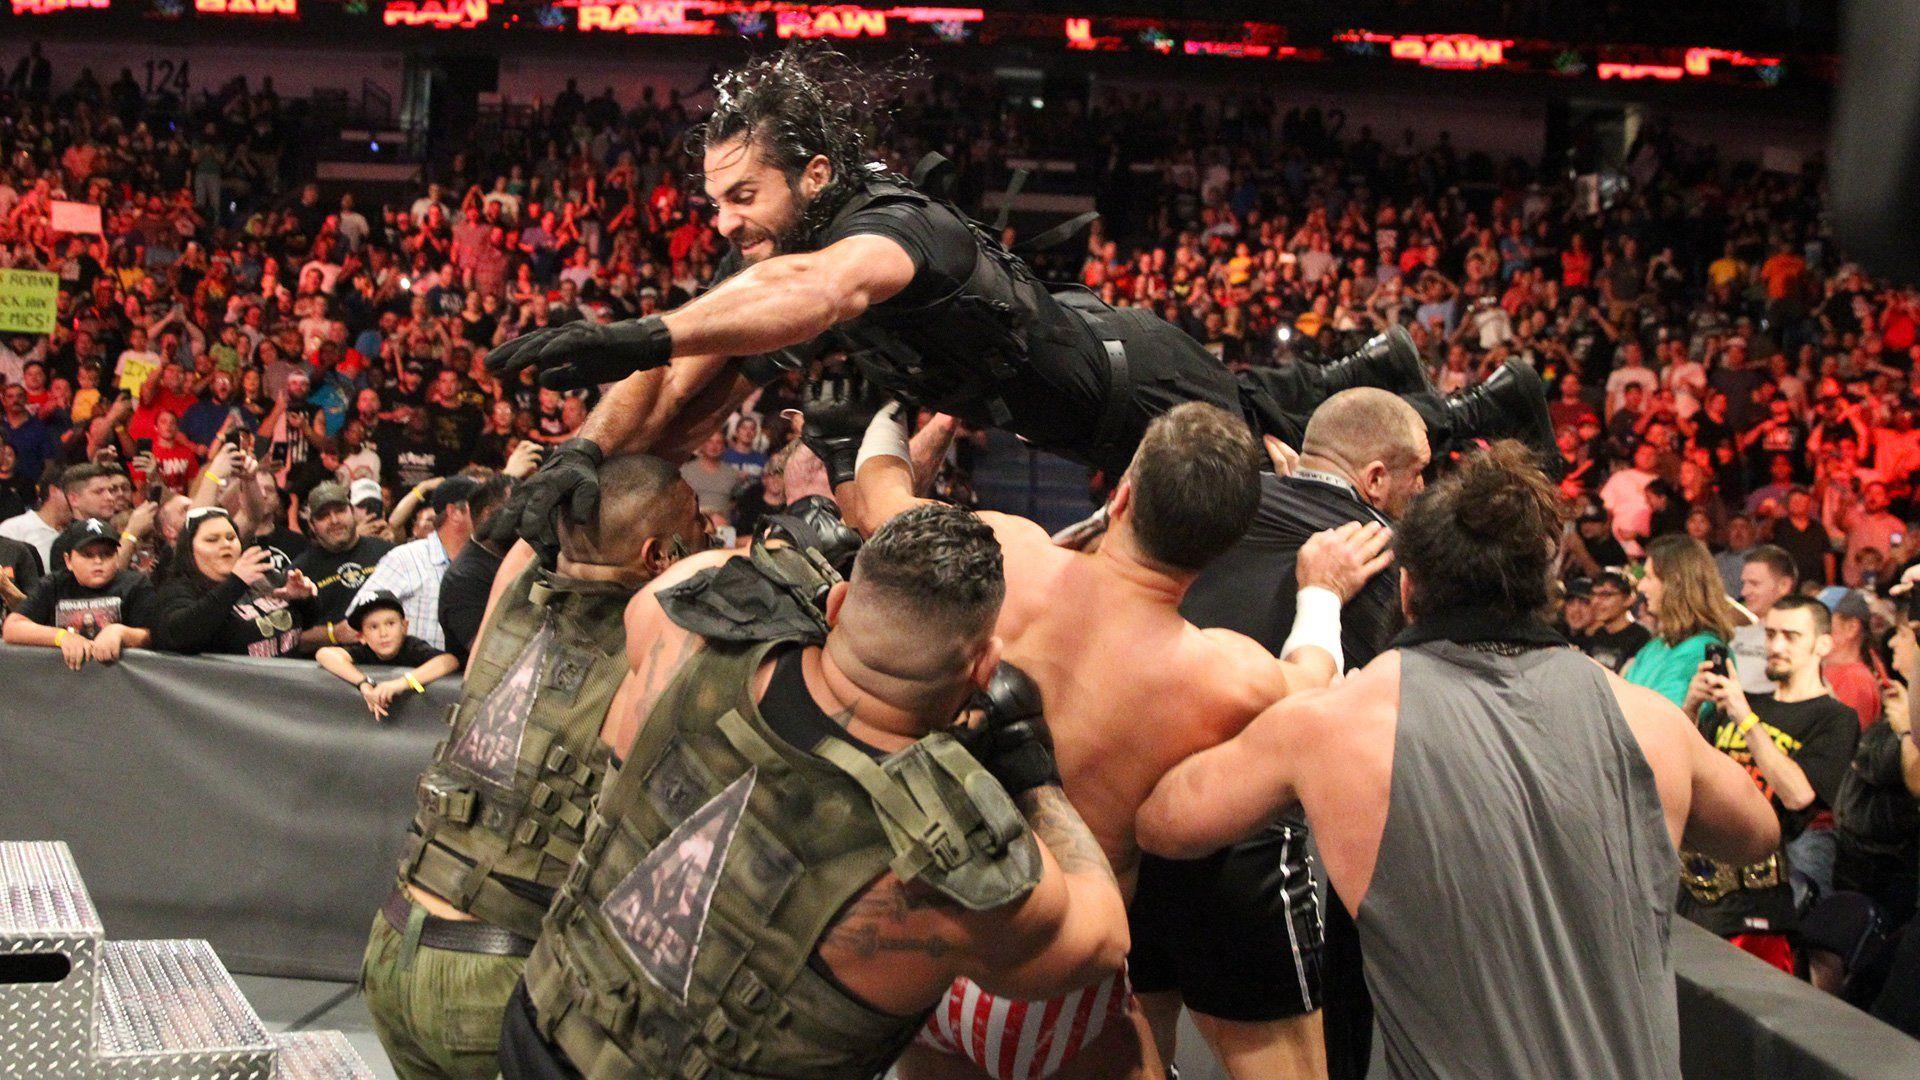 The Shield strike back at their attackers: Raw, Sept. 2018